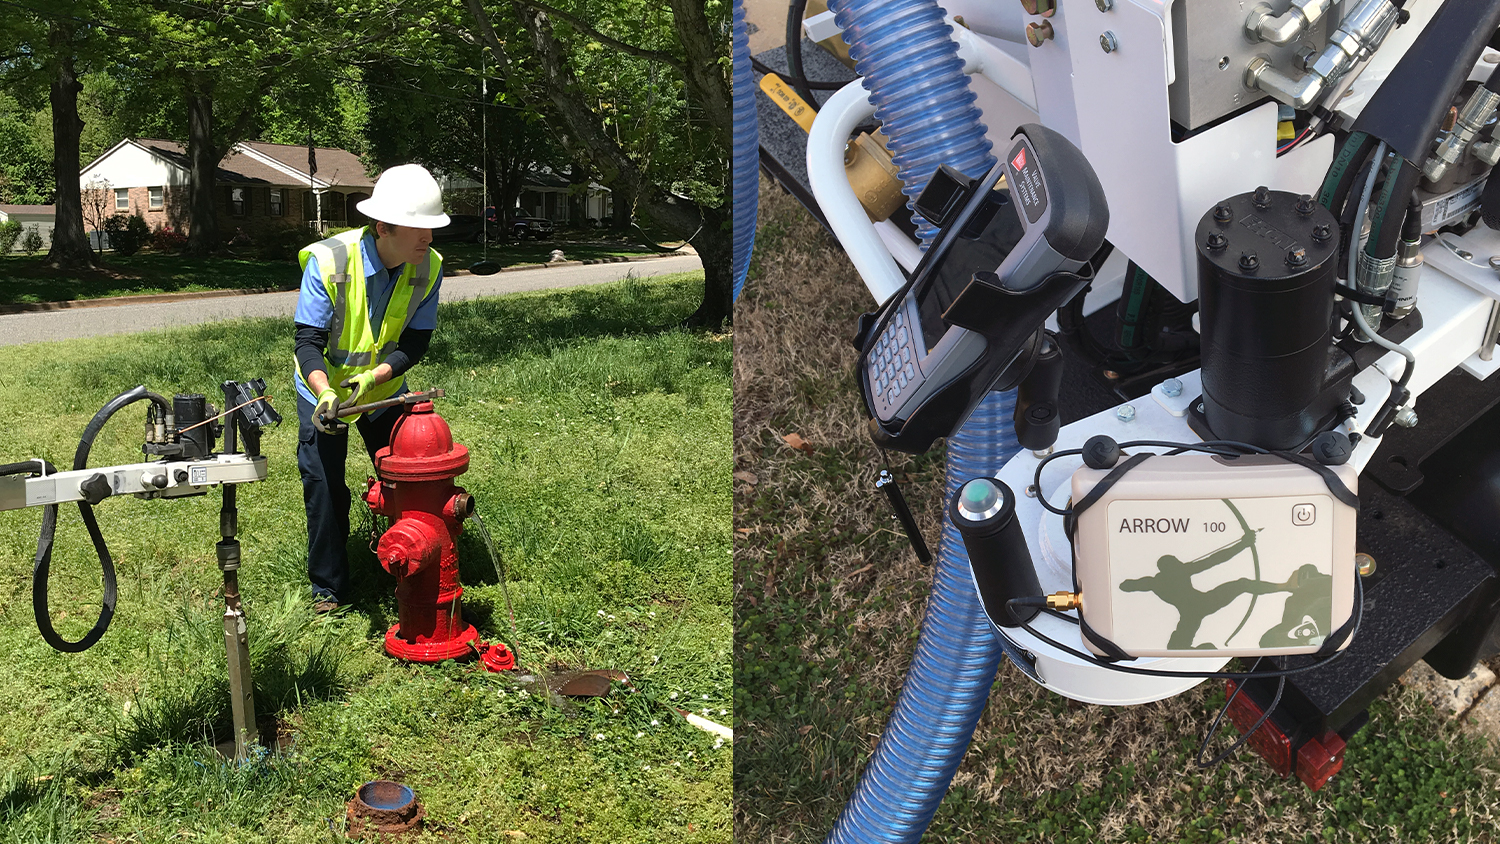 CASE STUDY - CITY OF GASTONIA Gastonia Two Rivers Utility valve exercising with Arrow 100 GNSS receivers